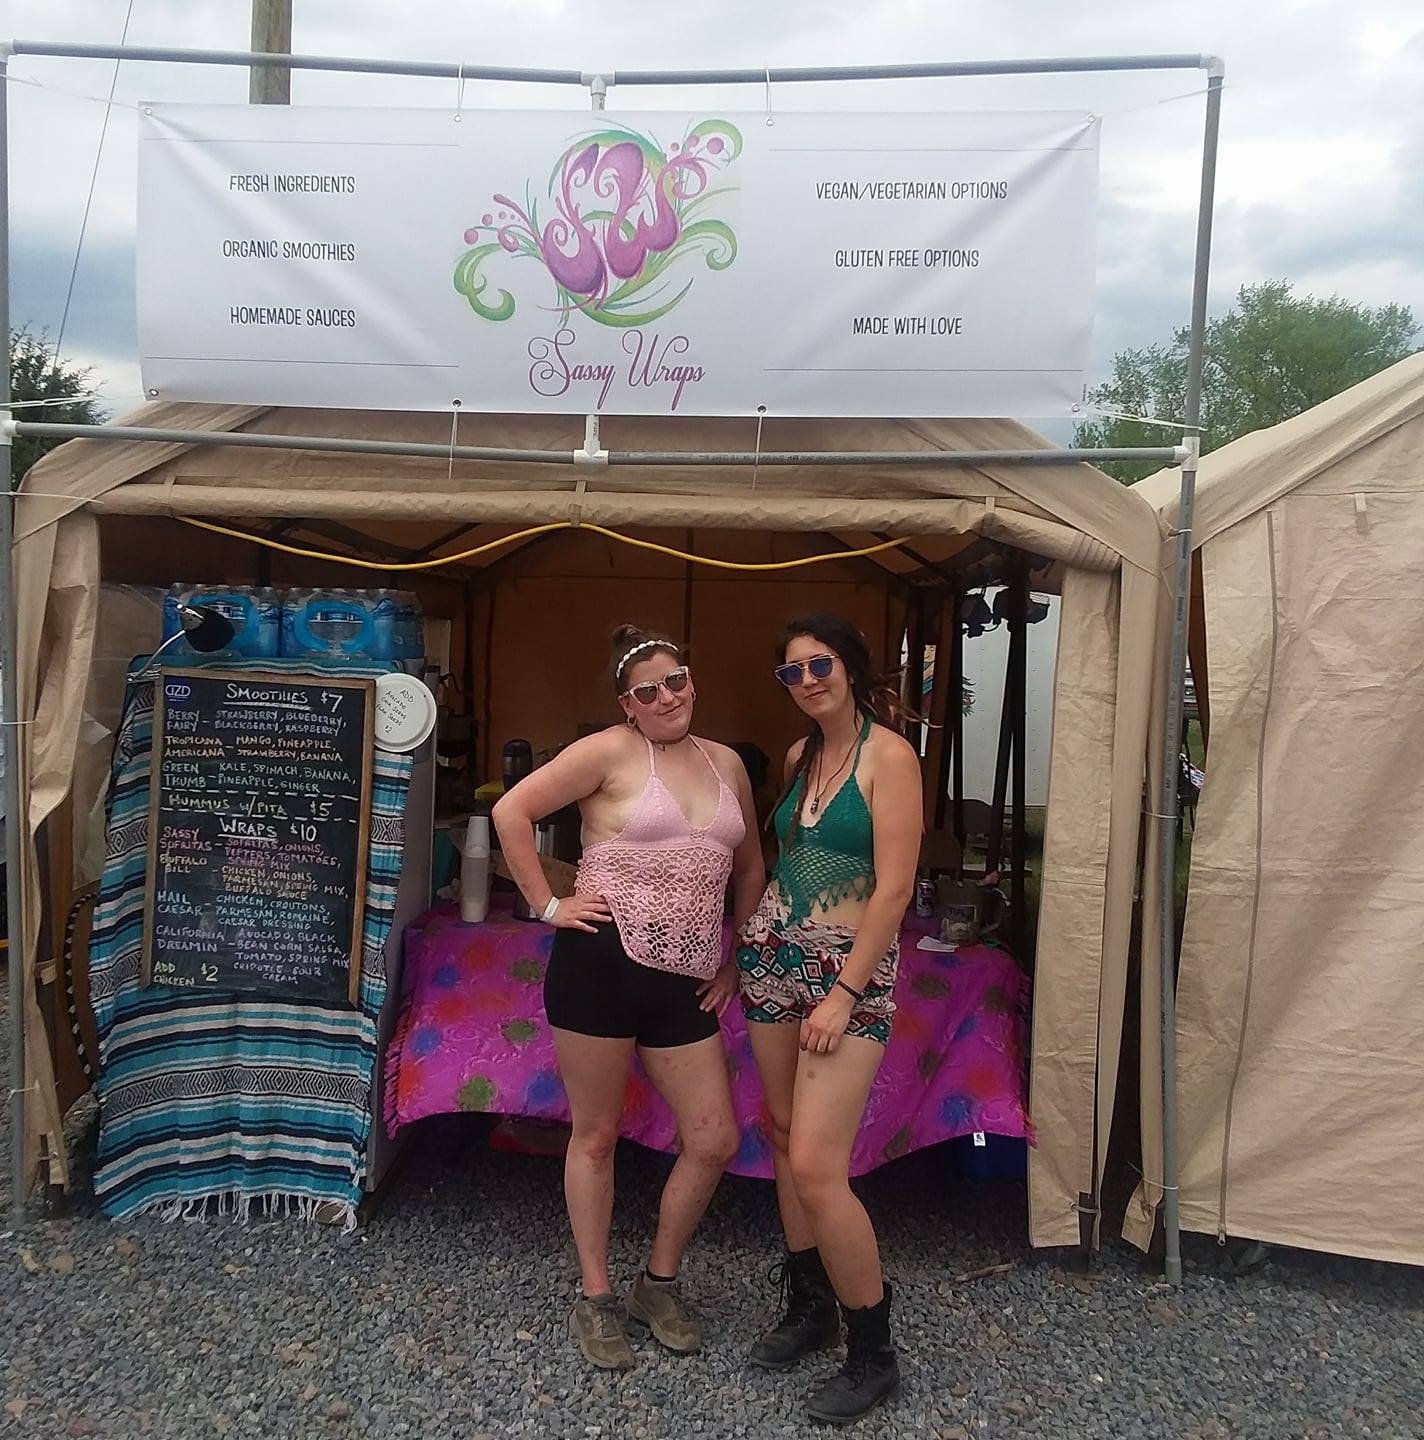 Community Spotlight: Interview with Holly of “Sassy Wraps” – a Festival Food Vendor